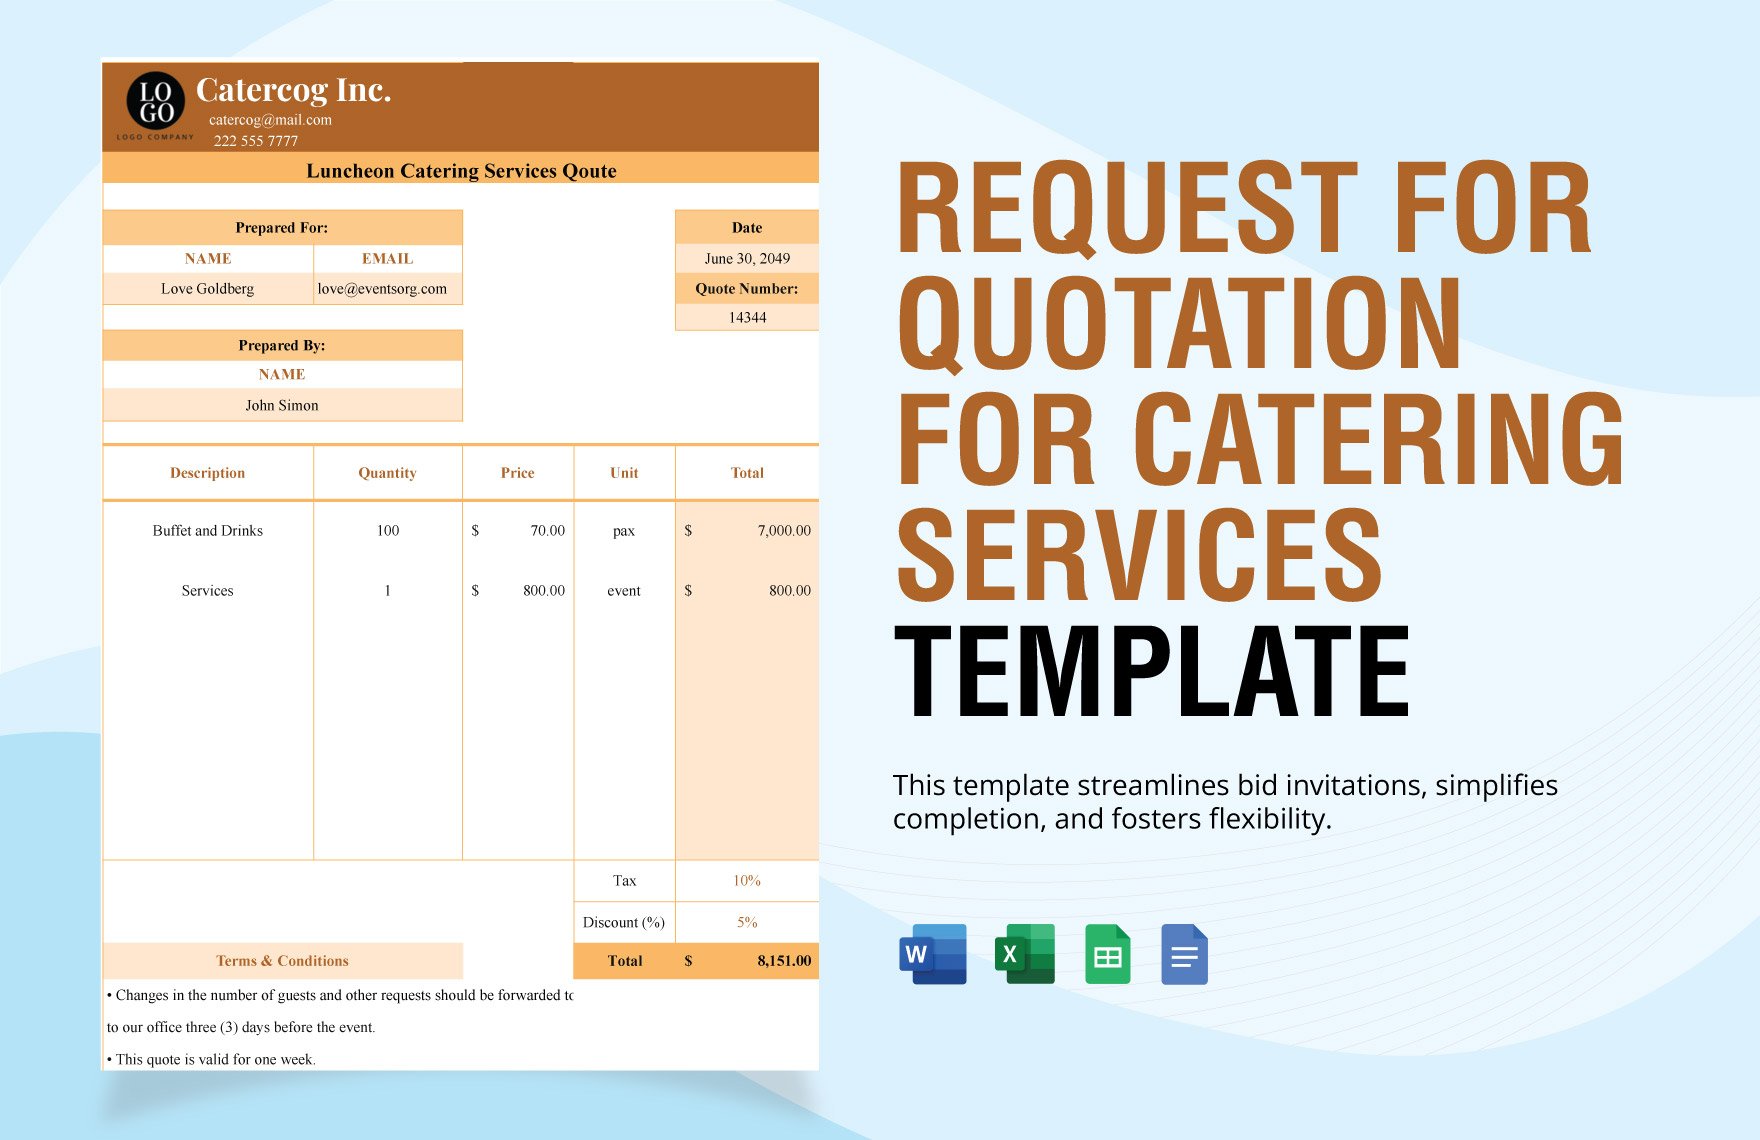 Free Request for Quotation for Catering Services Template